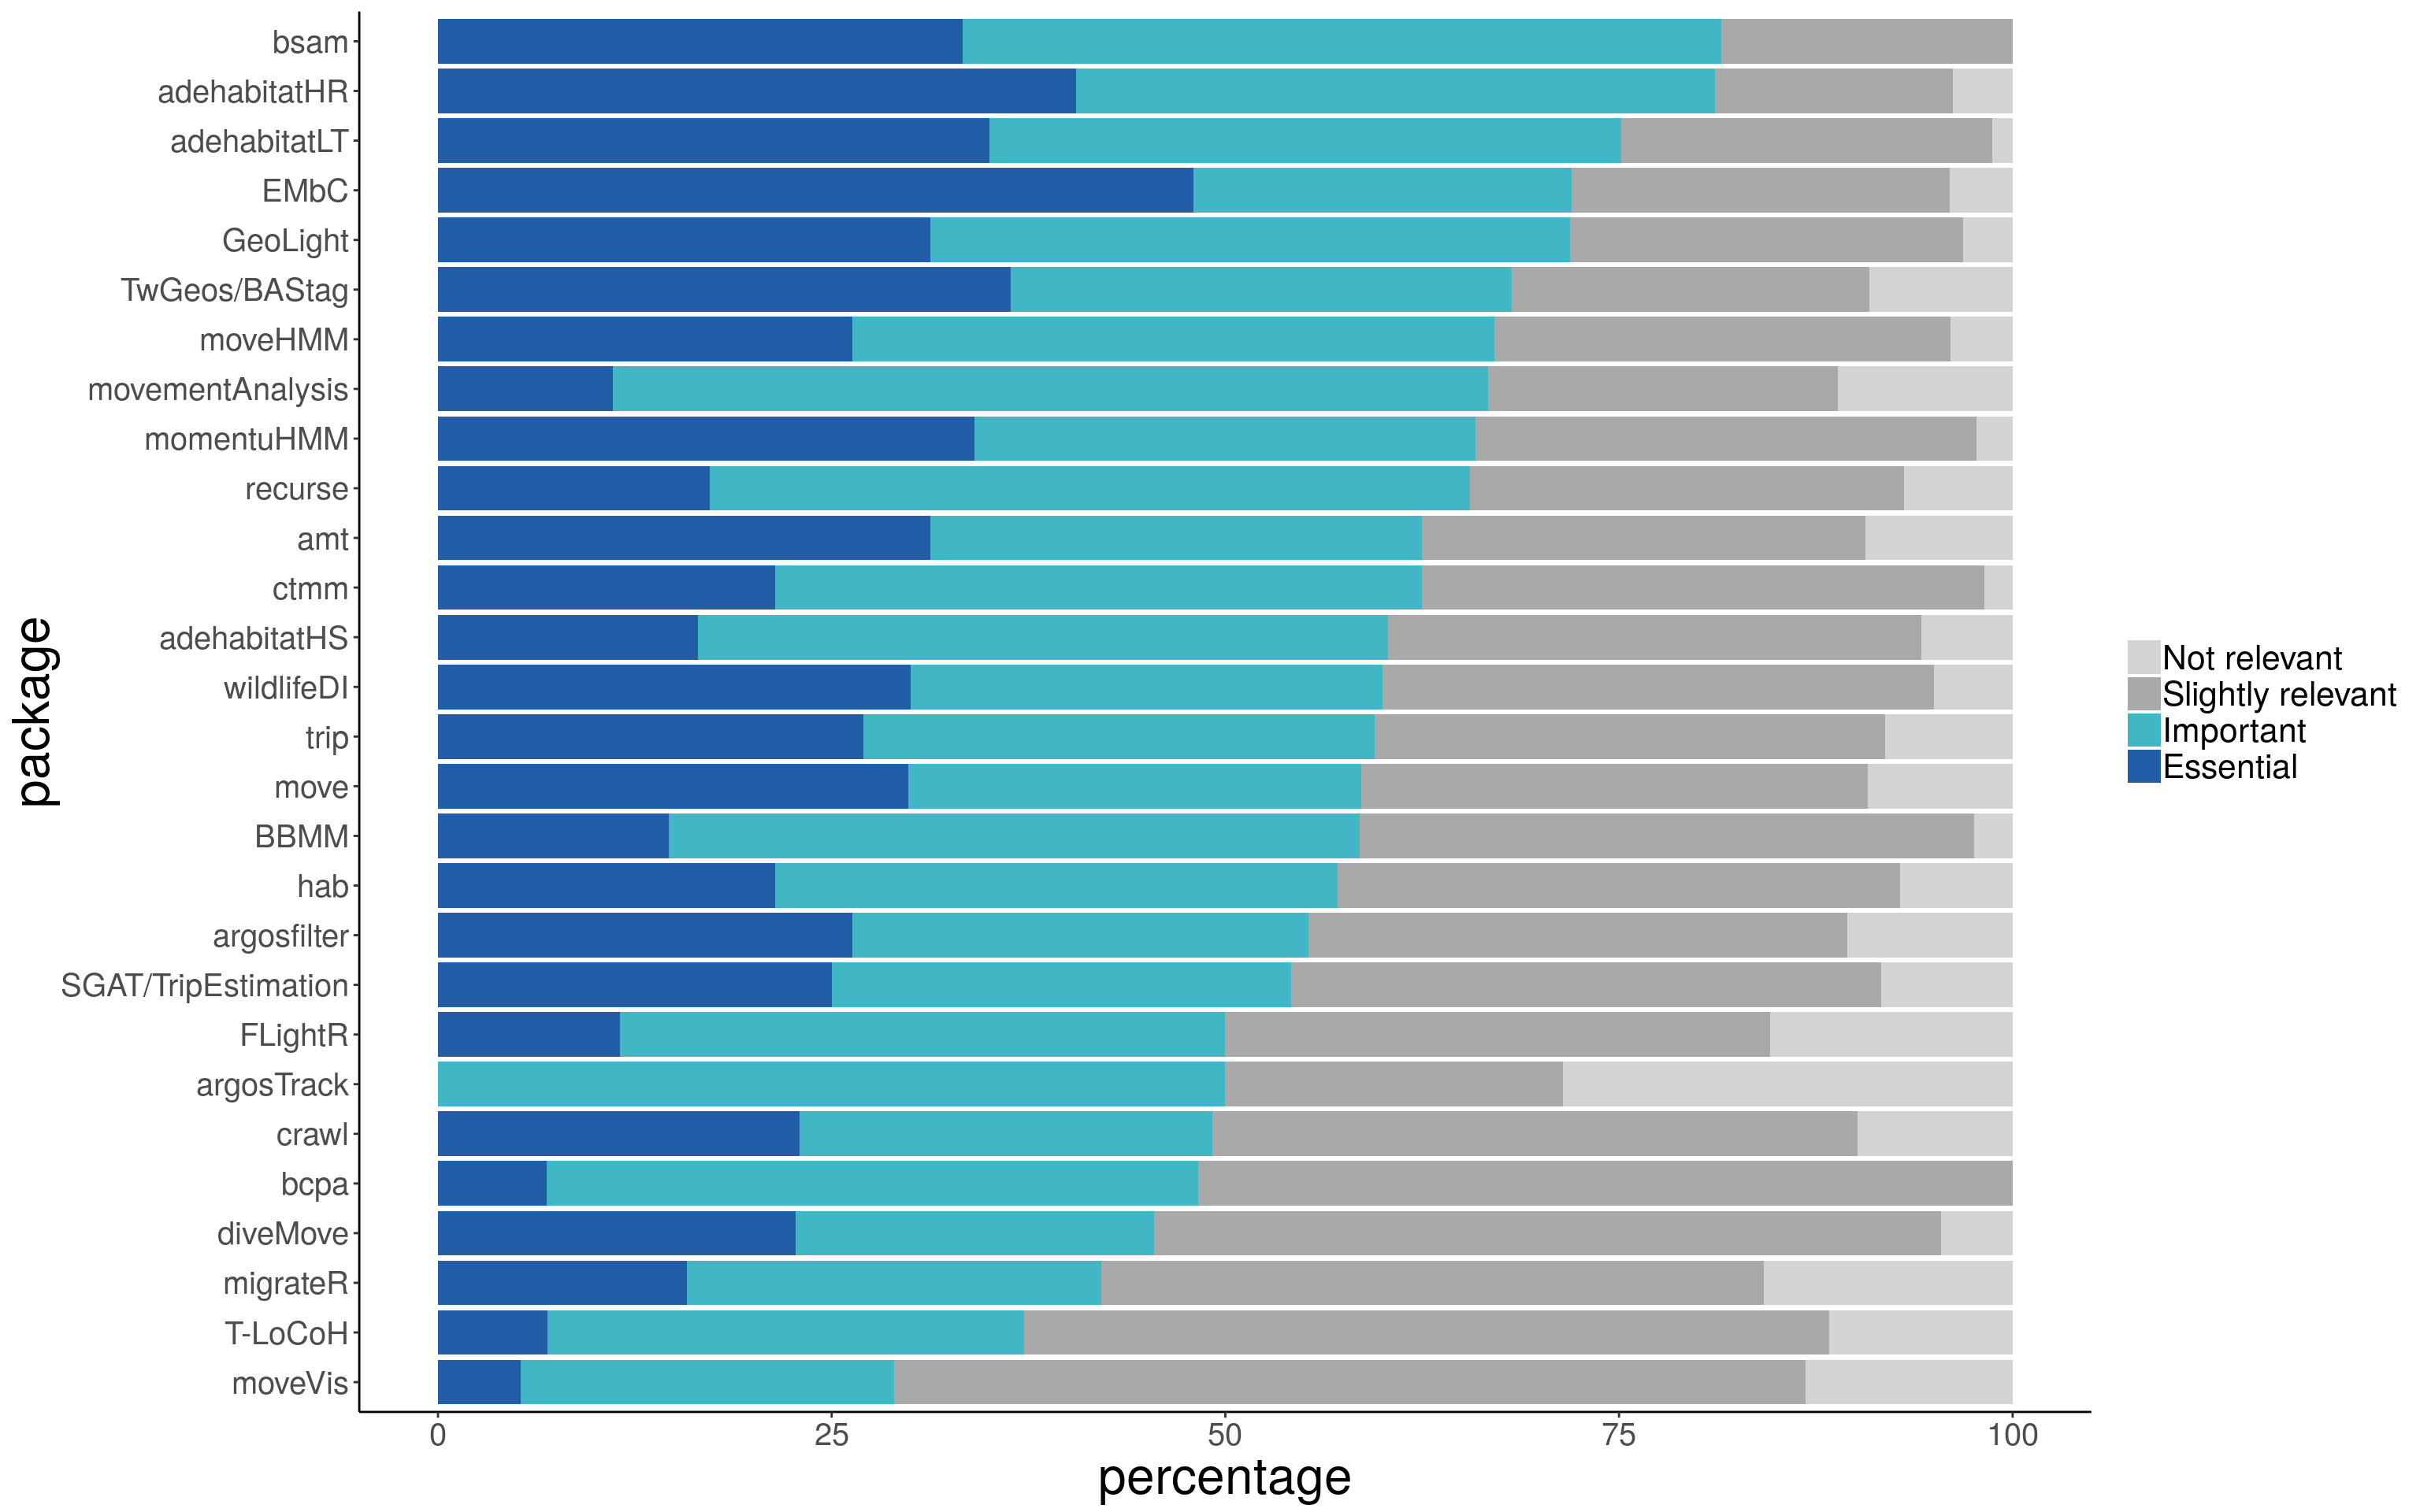 Bar plots of relative frequency of each category of package relevance (for packages with more than 5 users)